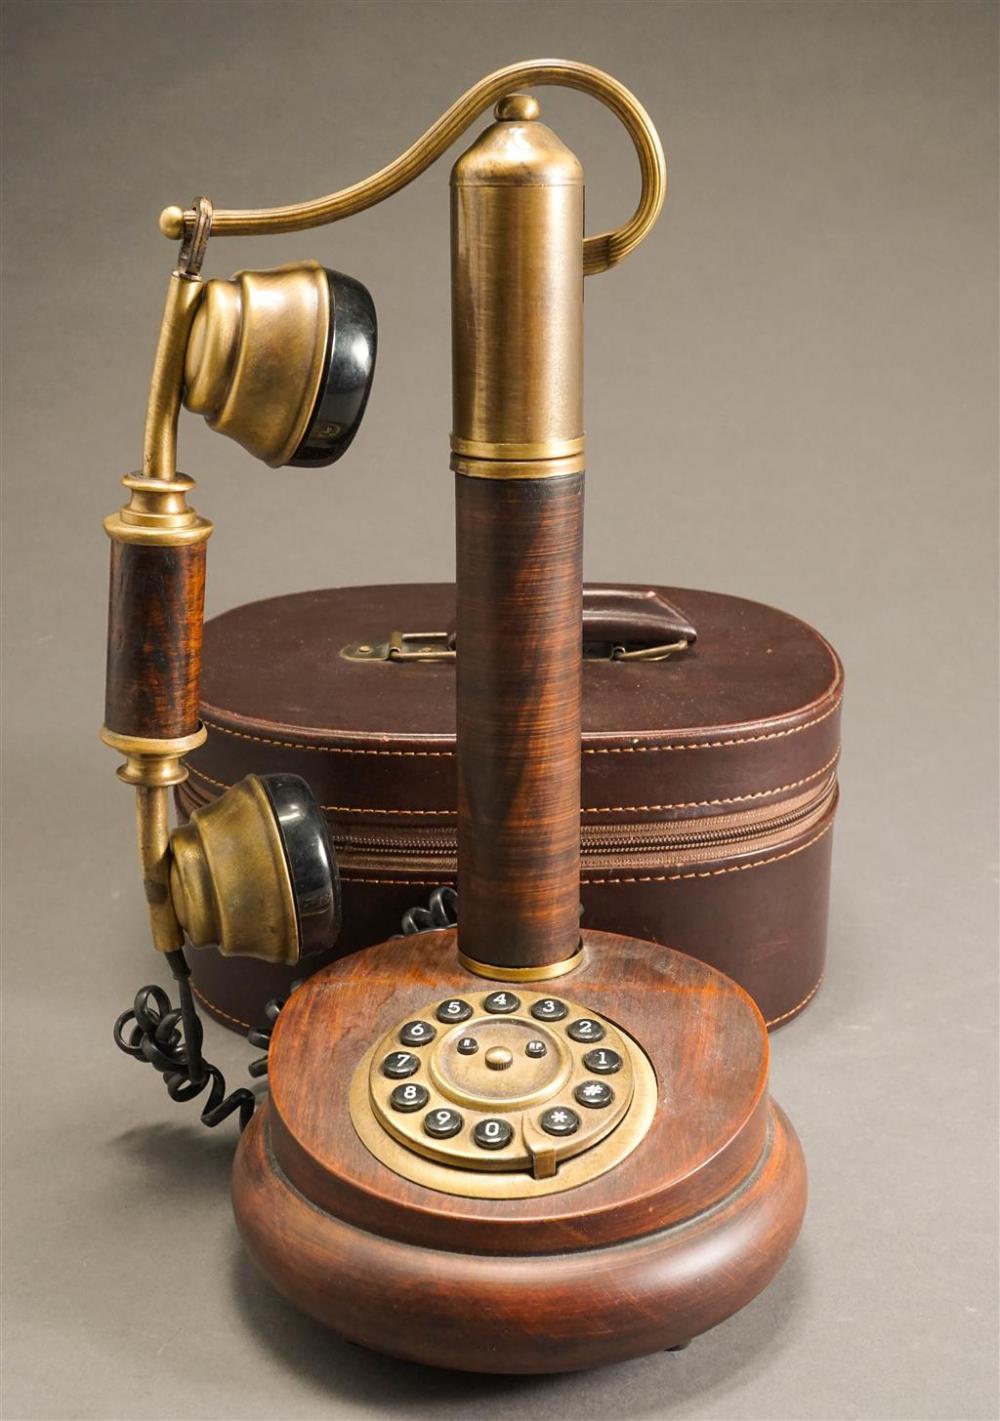 SITEL WOOD AND BRASS TELEPHONE 3293e9